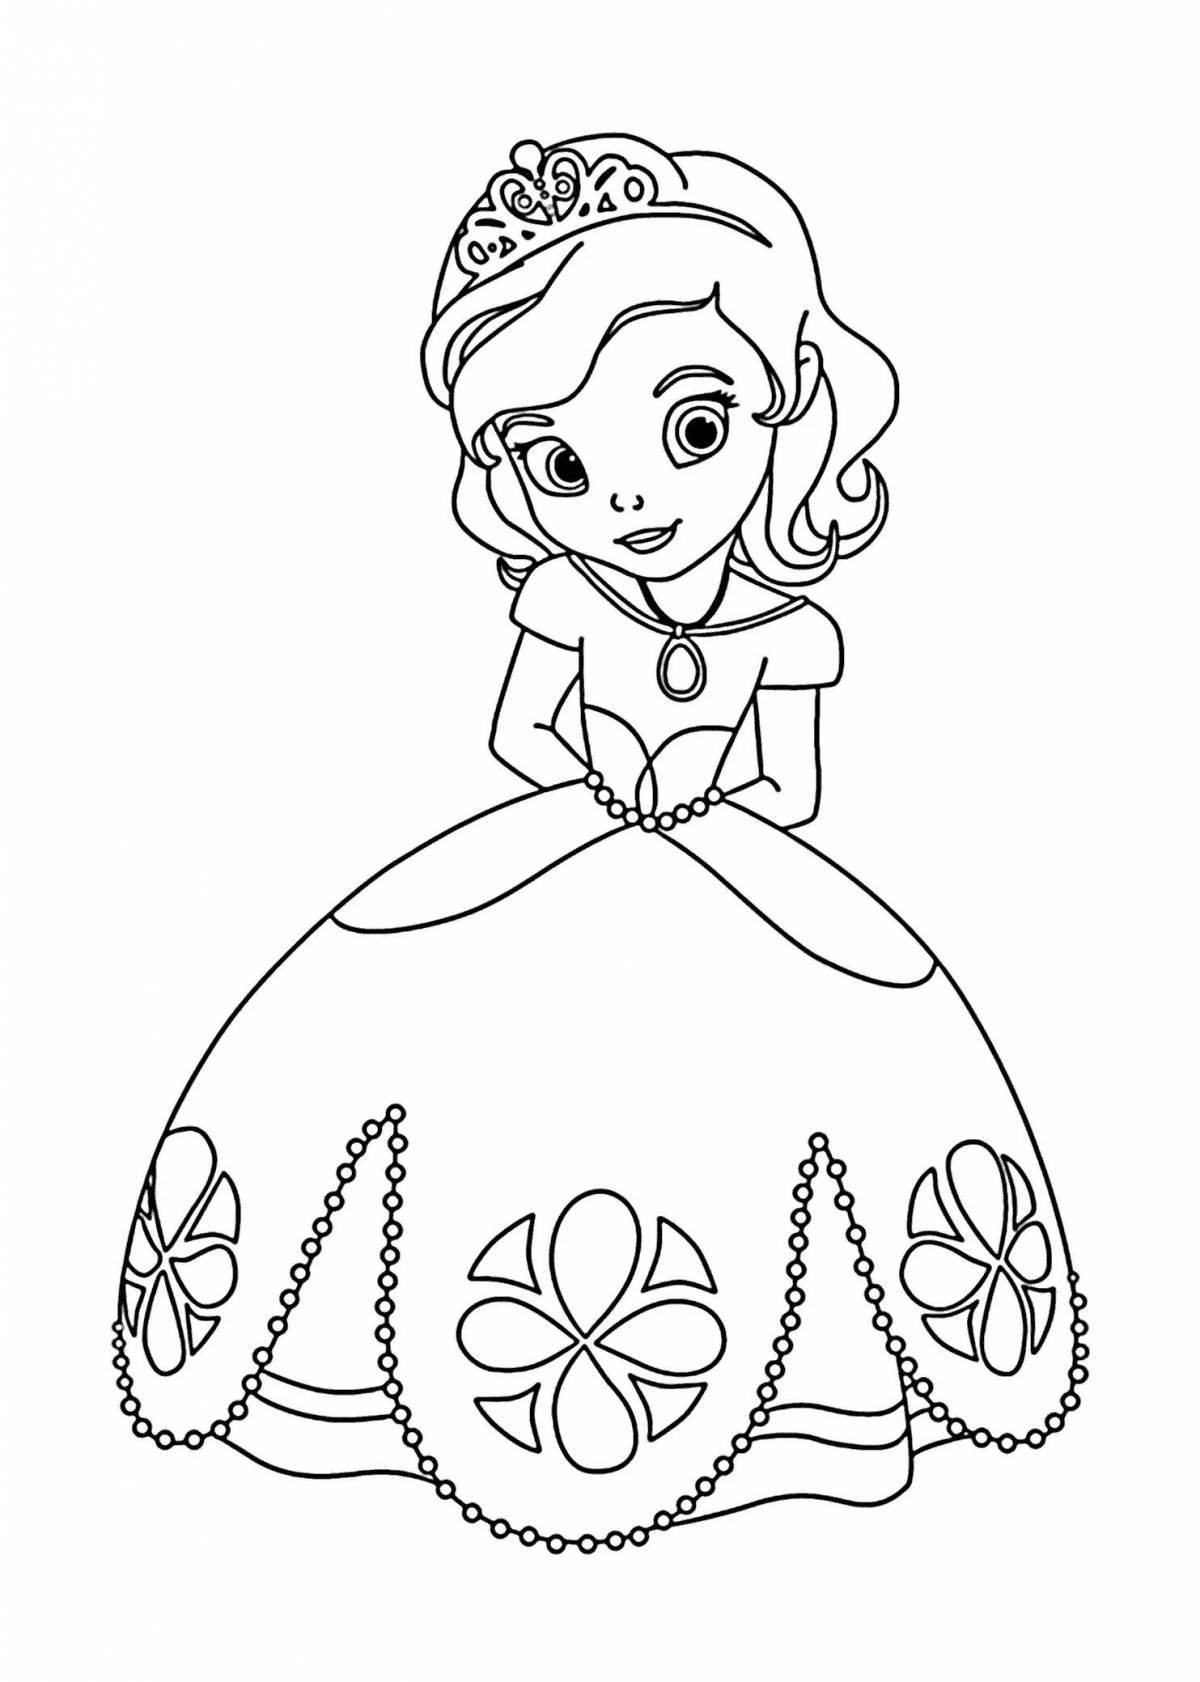 Amazing little princess coloring pages